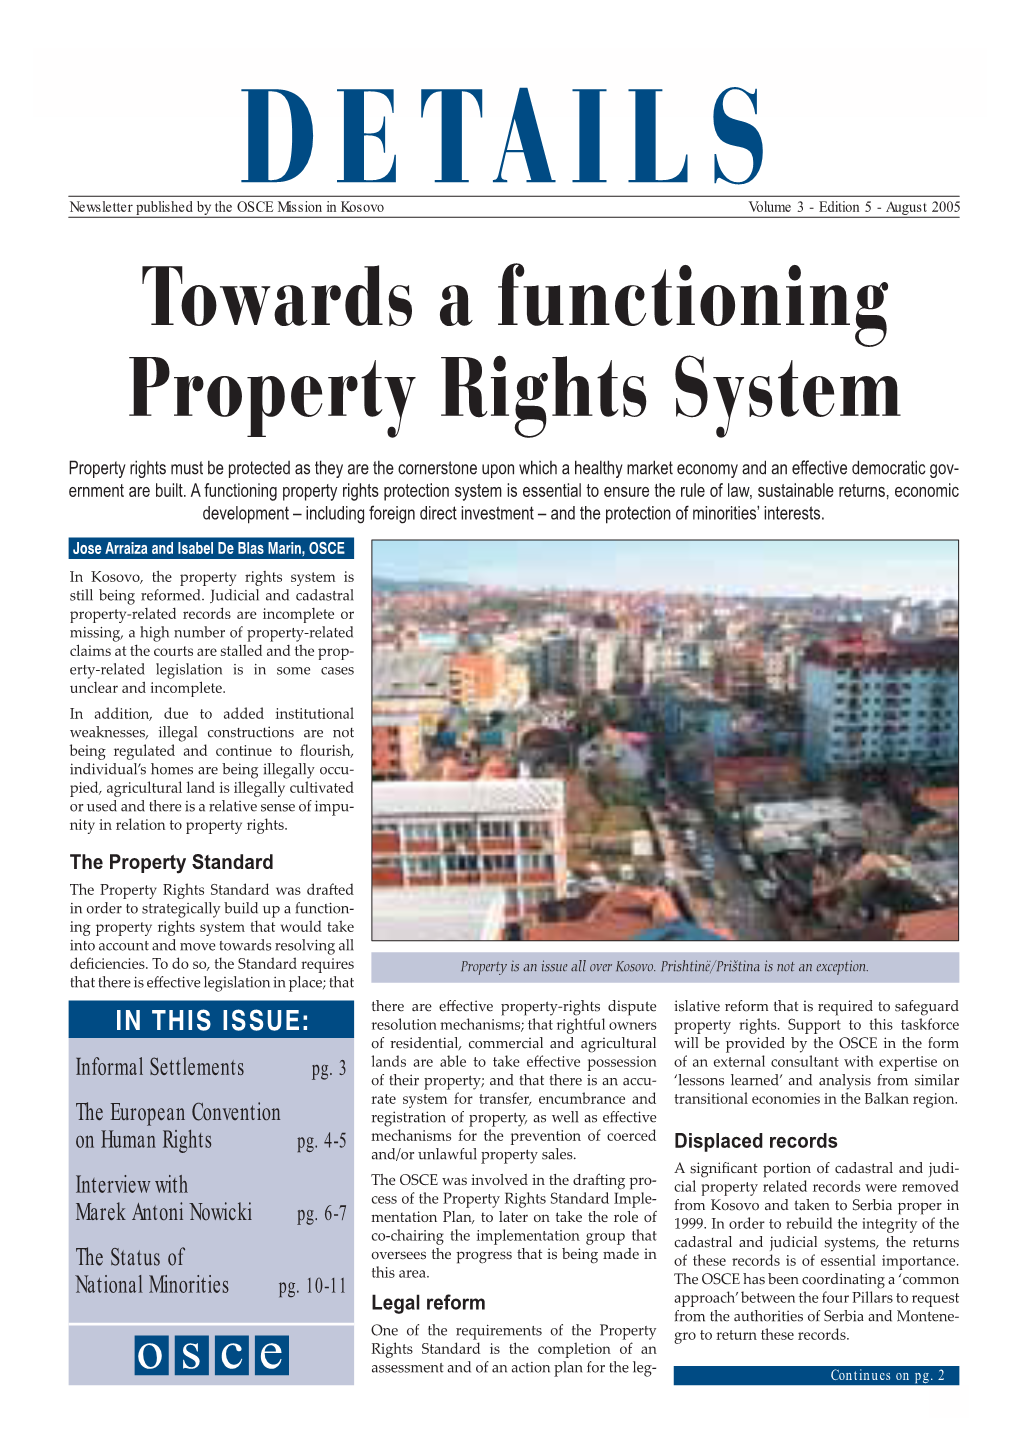 Towards a Functioning Property Rights System